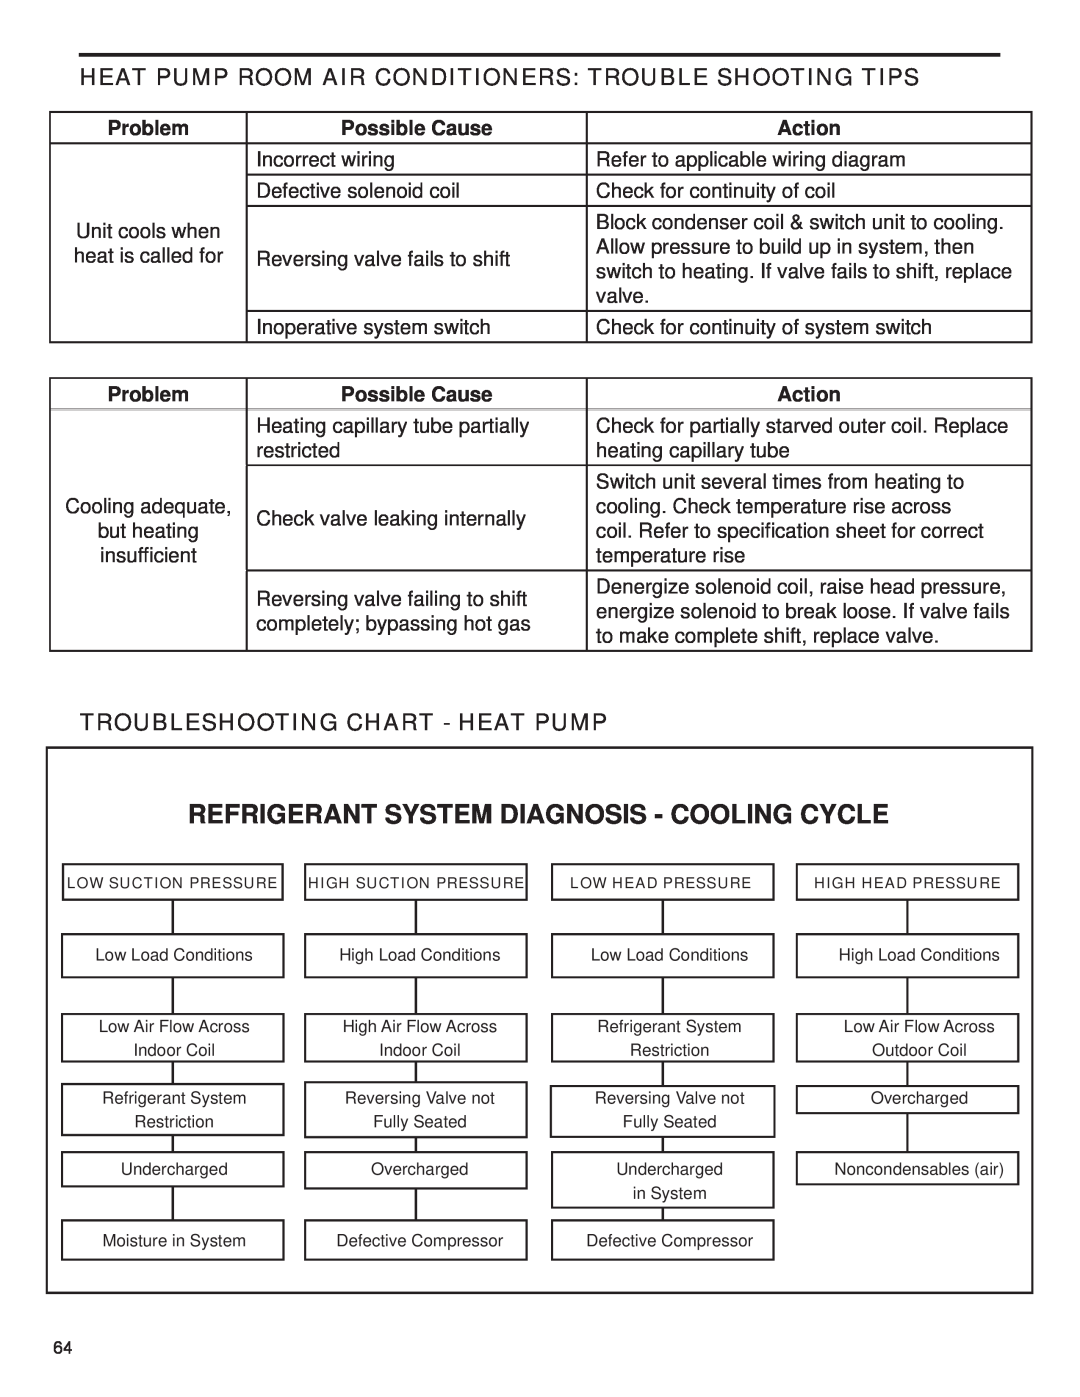 Friedrich R-410A Refrigerant System Diagnosis - Cooling Cycle, Troubleshooting Chart - Heat Pump, Problem, Possible Cause 